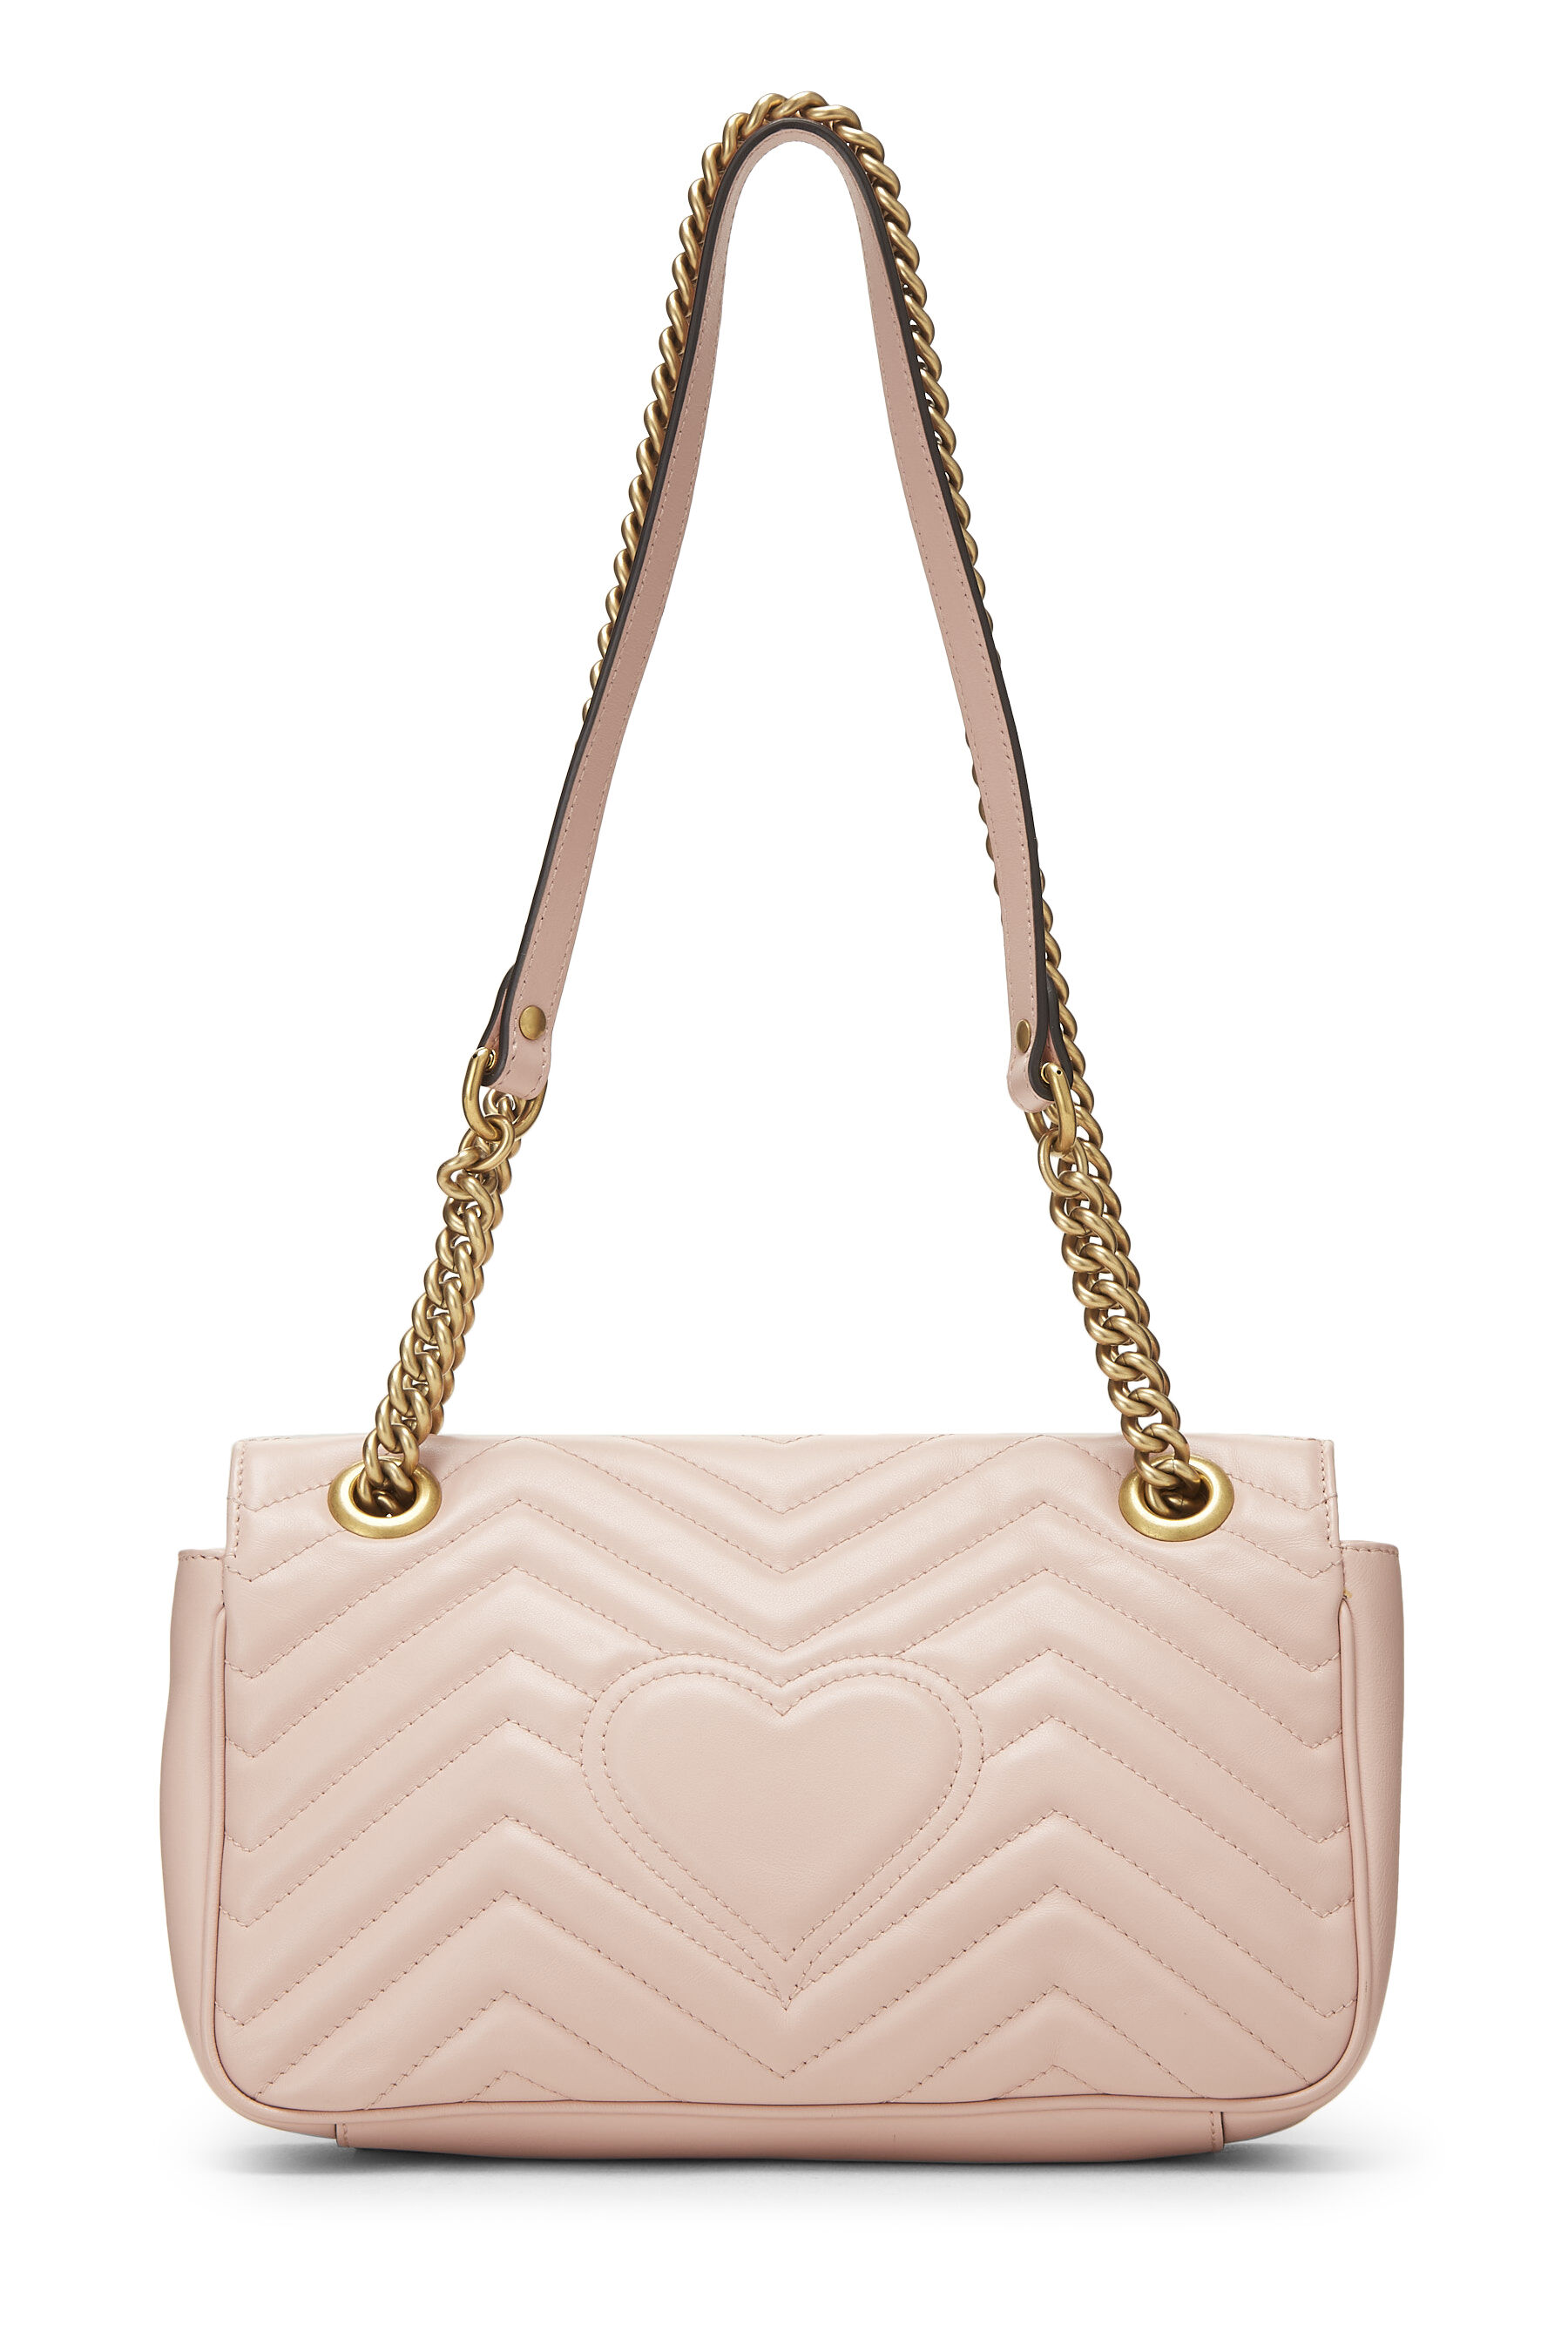 Pink Leather GG Marmont Shoulder Bag Small